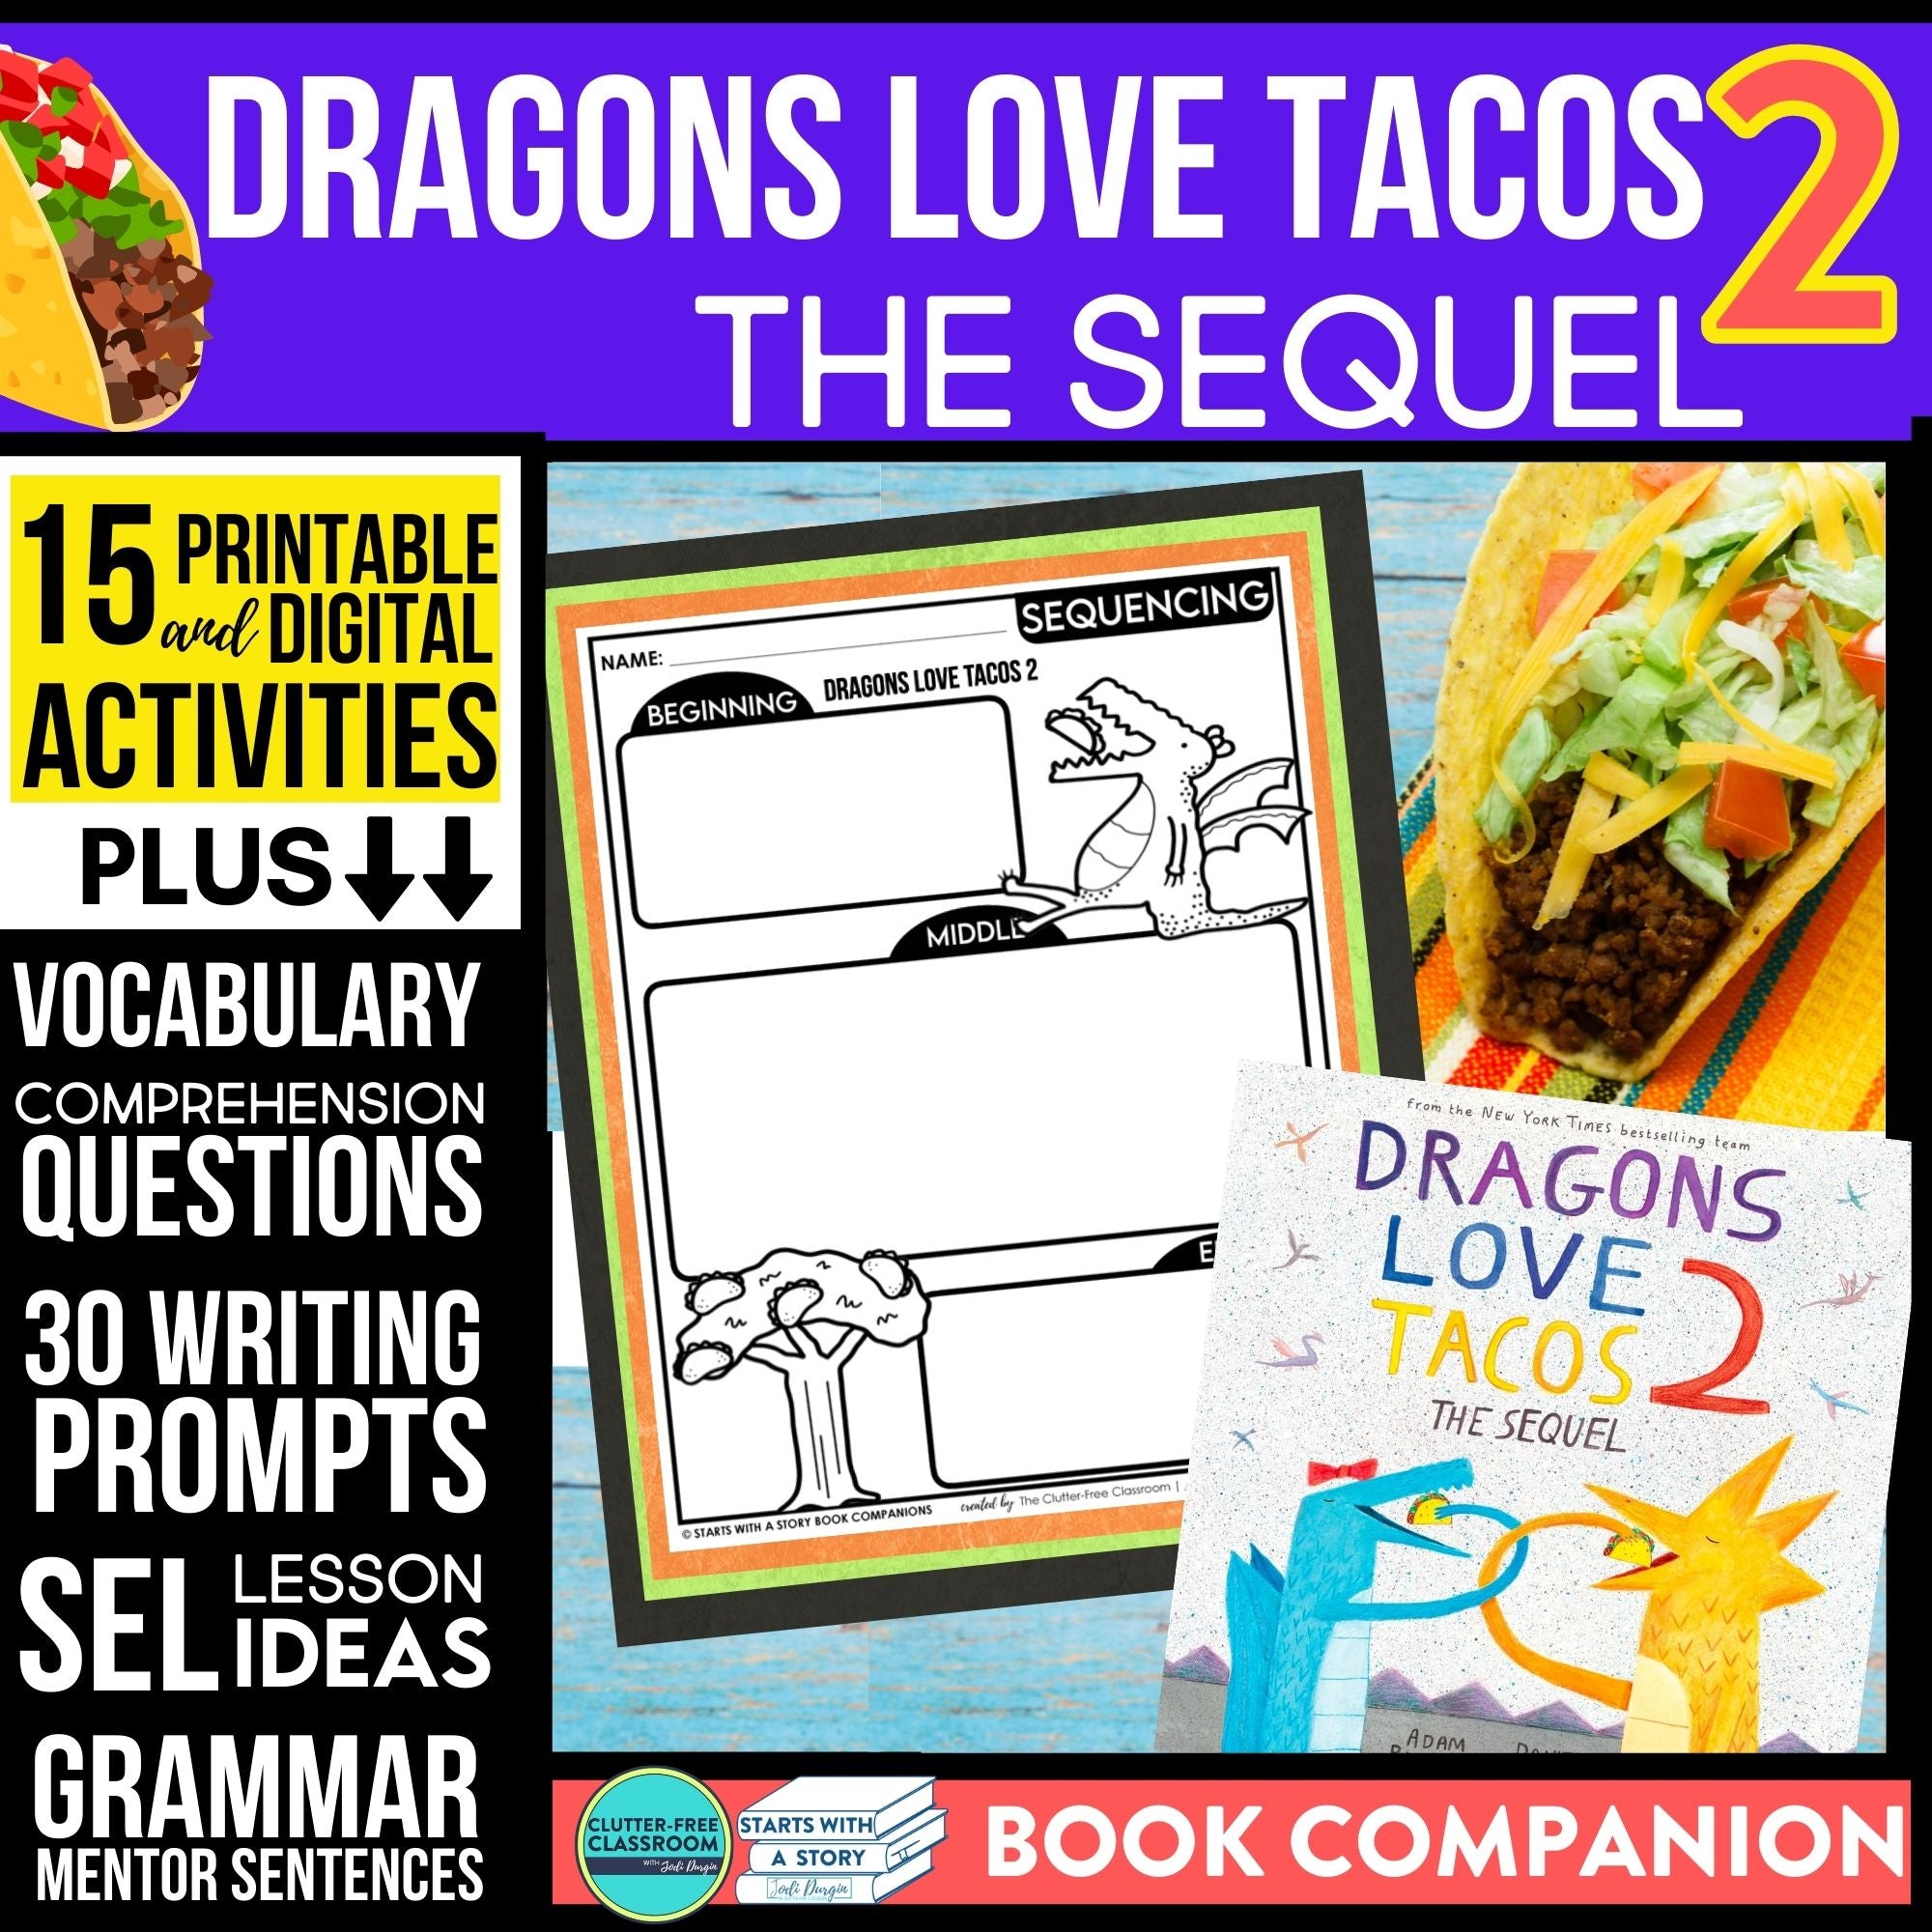 DRAGONS LOVE TACOS 2 activities and lesson plan ideas